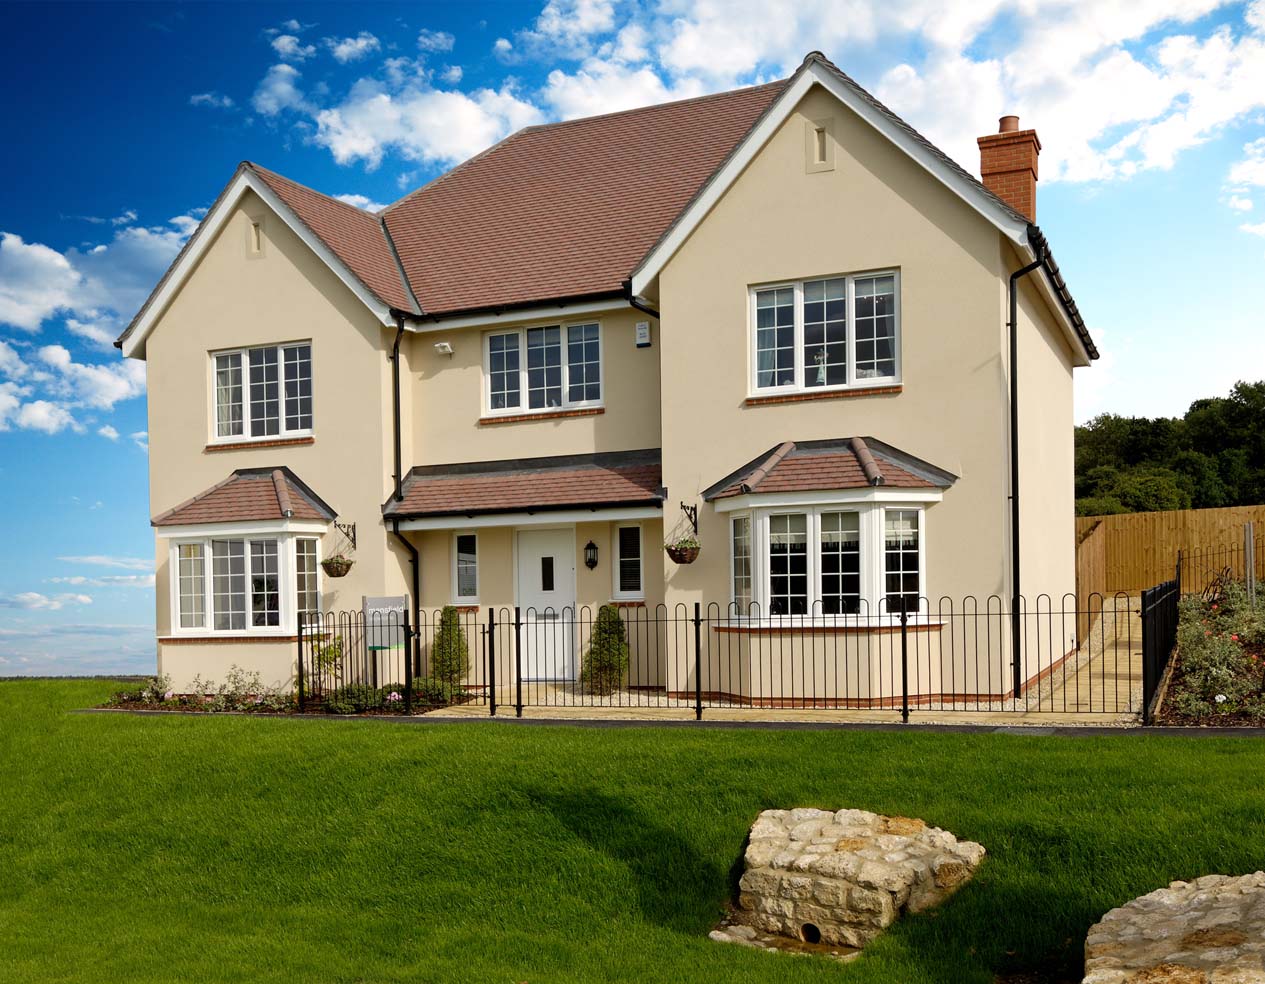 homes-for-sale-oxford new-houses-for-sale-in-cumnor 44001